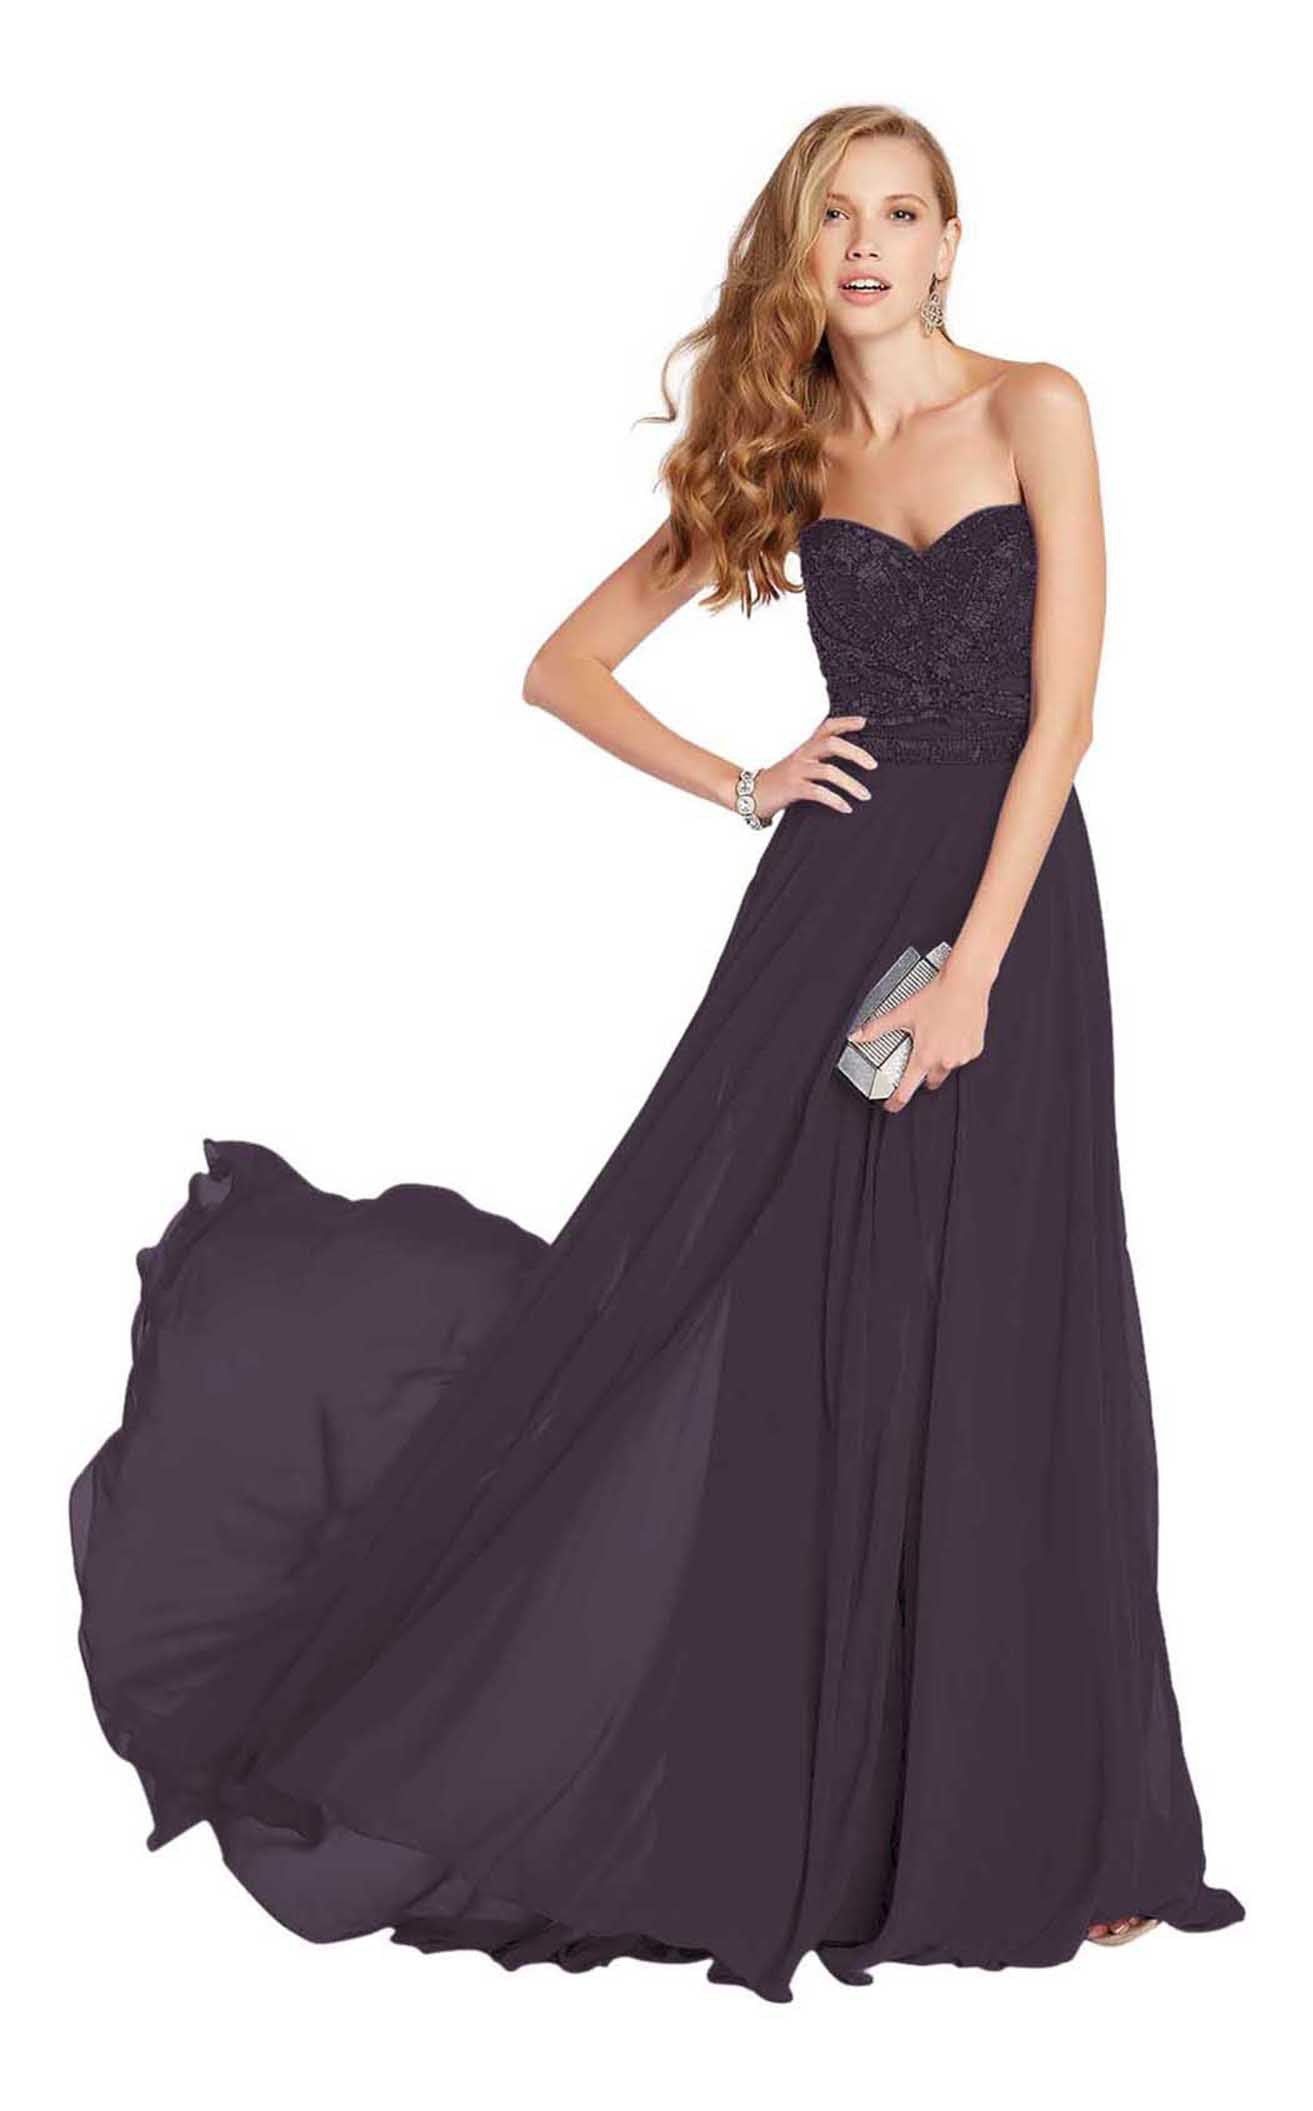 Alyce Paris - Embellished Sweetheart Flowy Evening Gown 60350SC